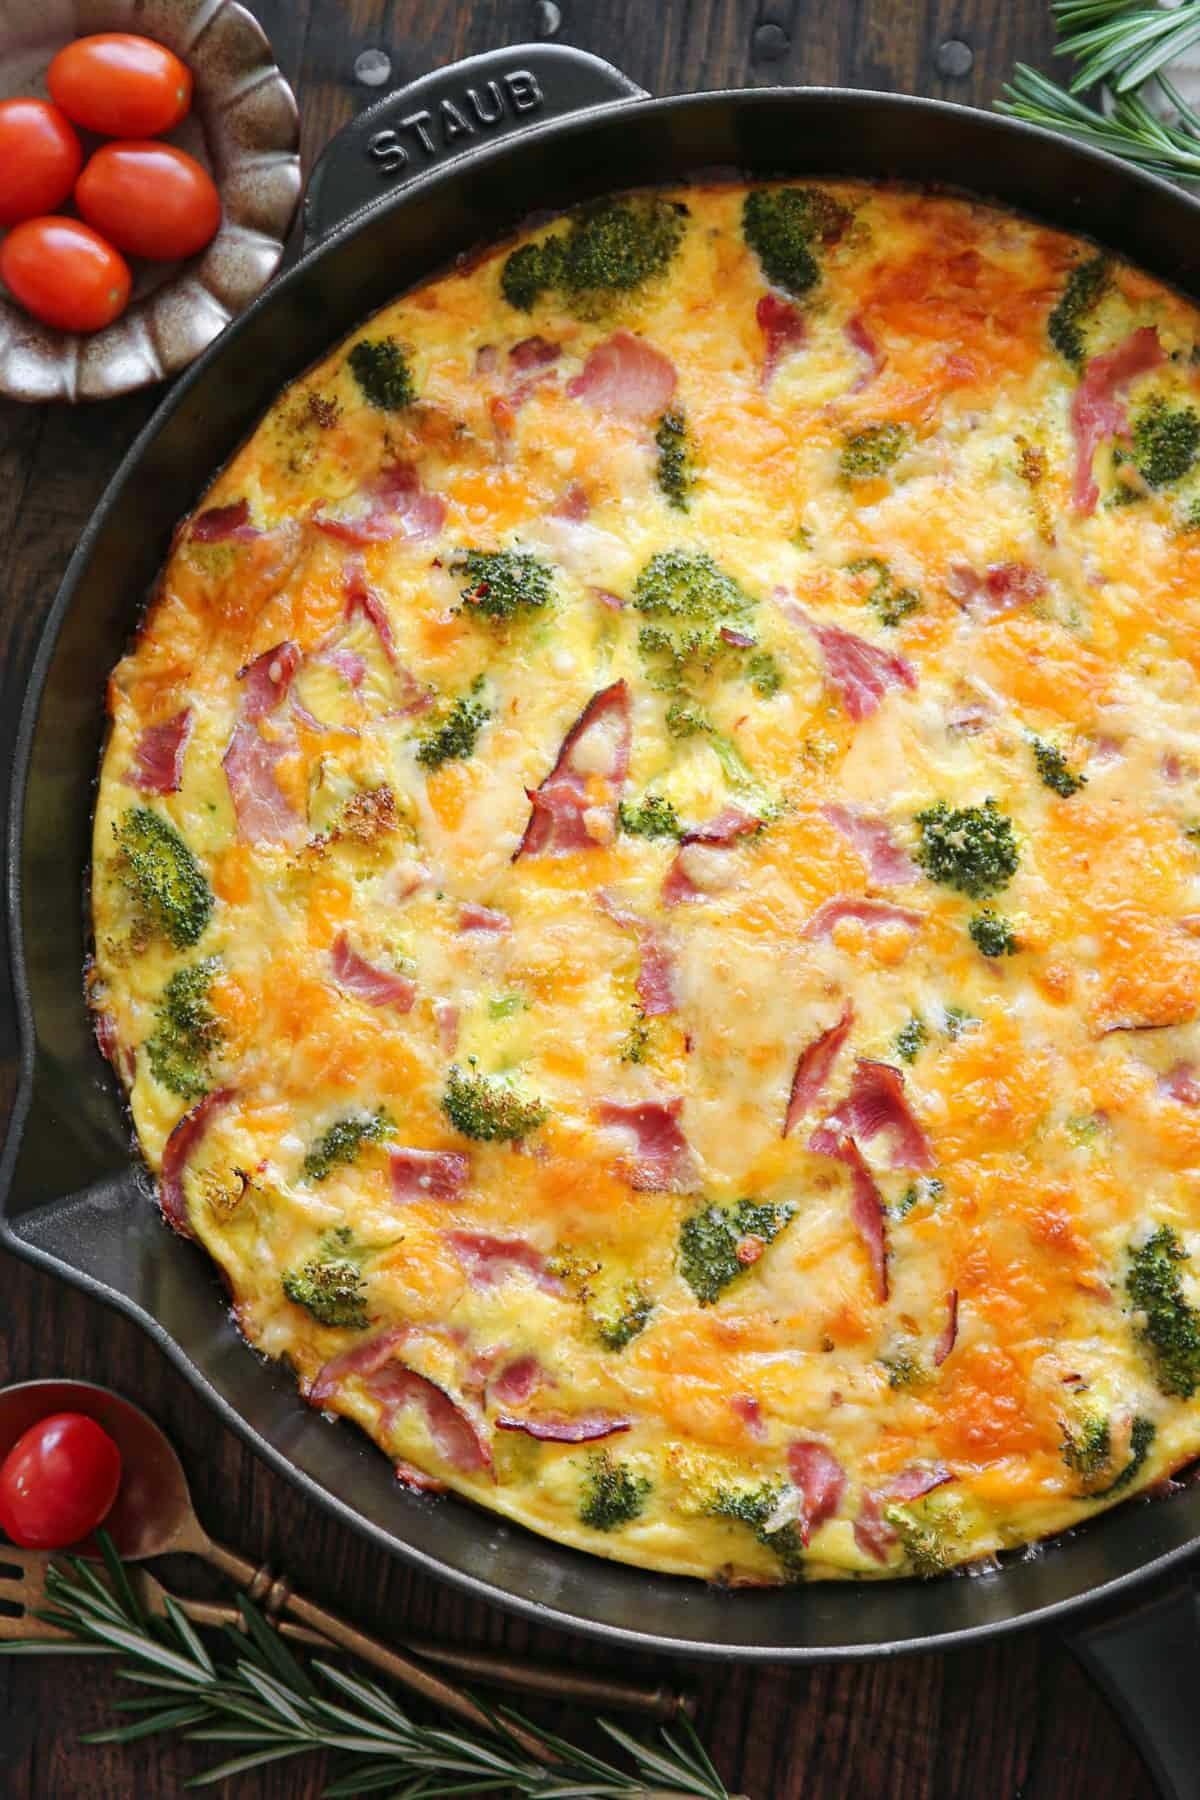 Egg Frittata with Ham, Broccoli, Pepper Jack, and Cheddar Cheese